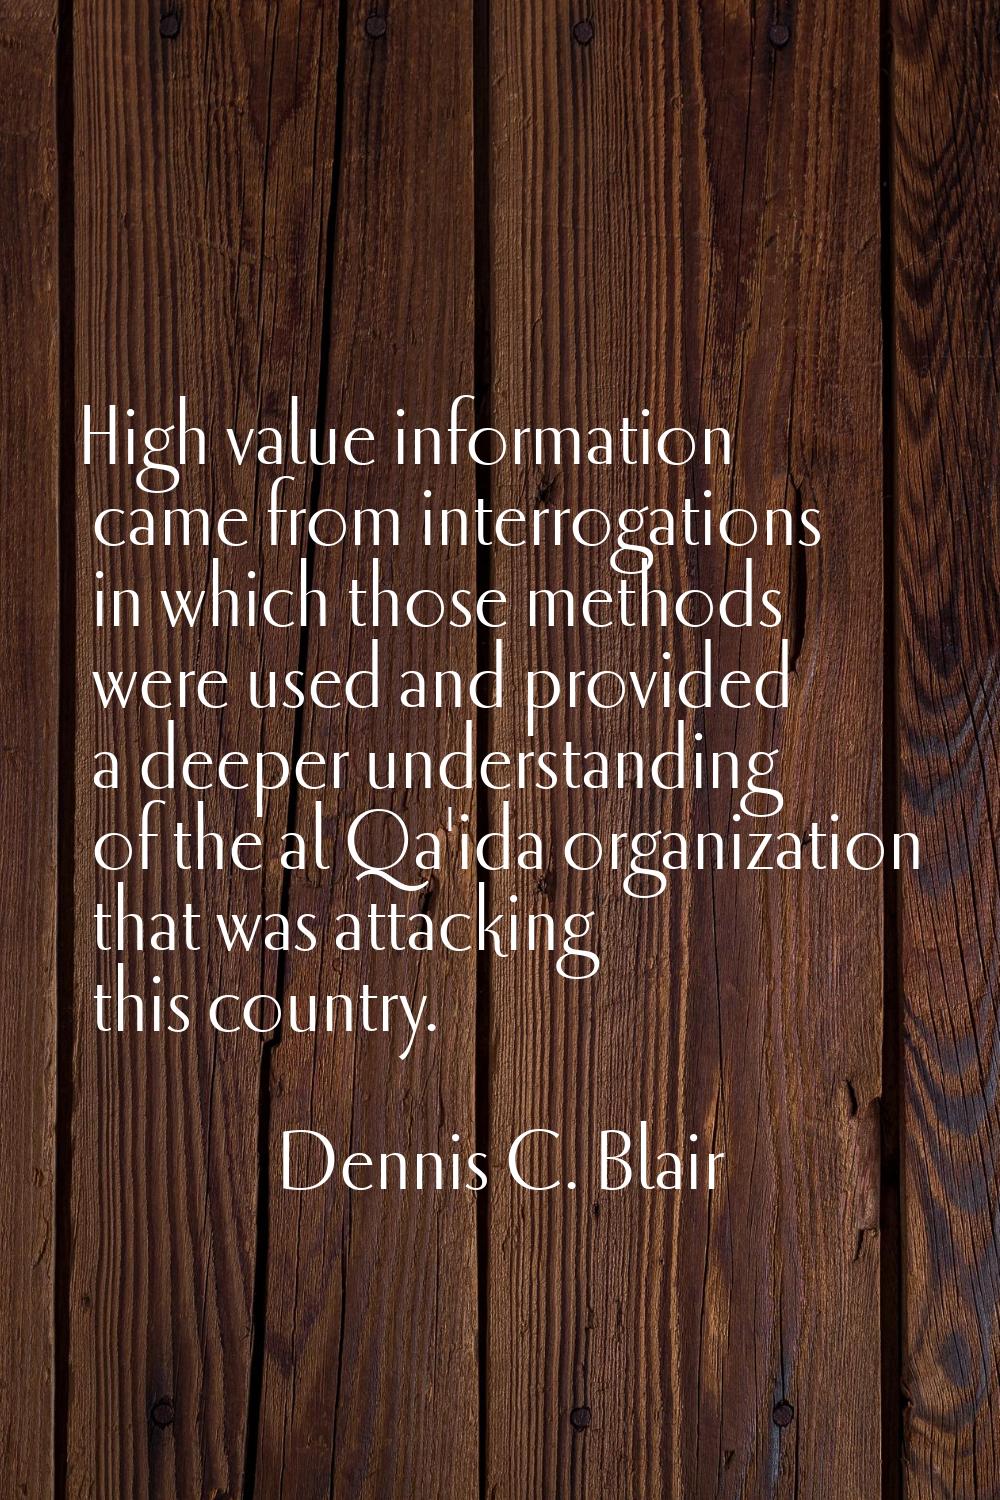 High value information came from interrogations in which those methods were used and provided a dee